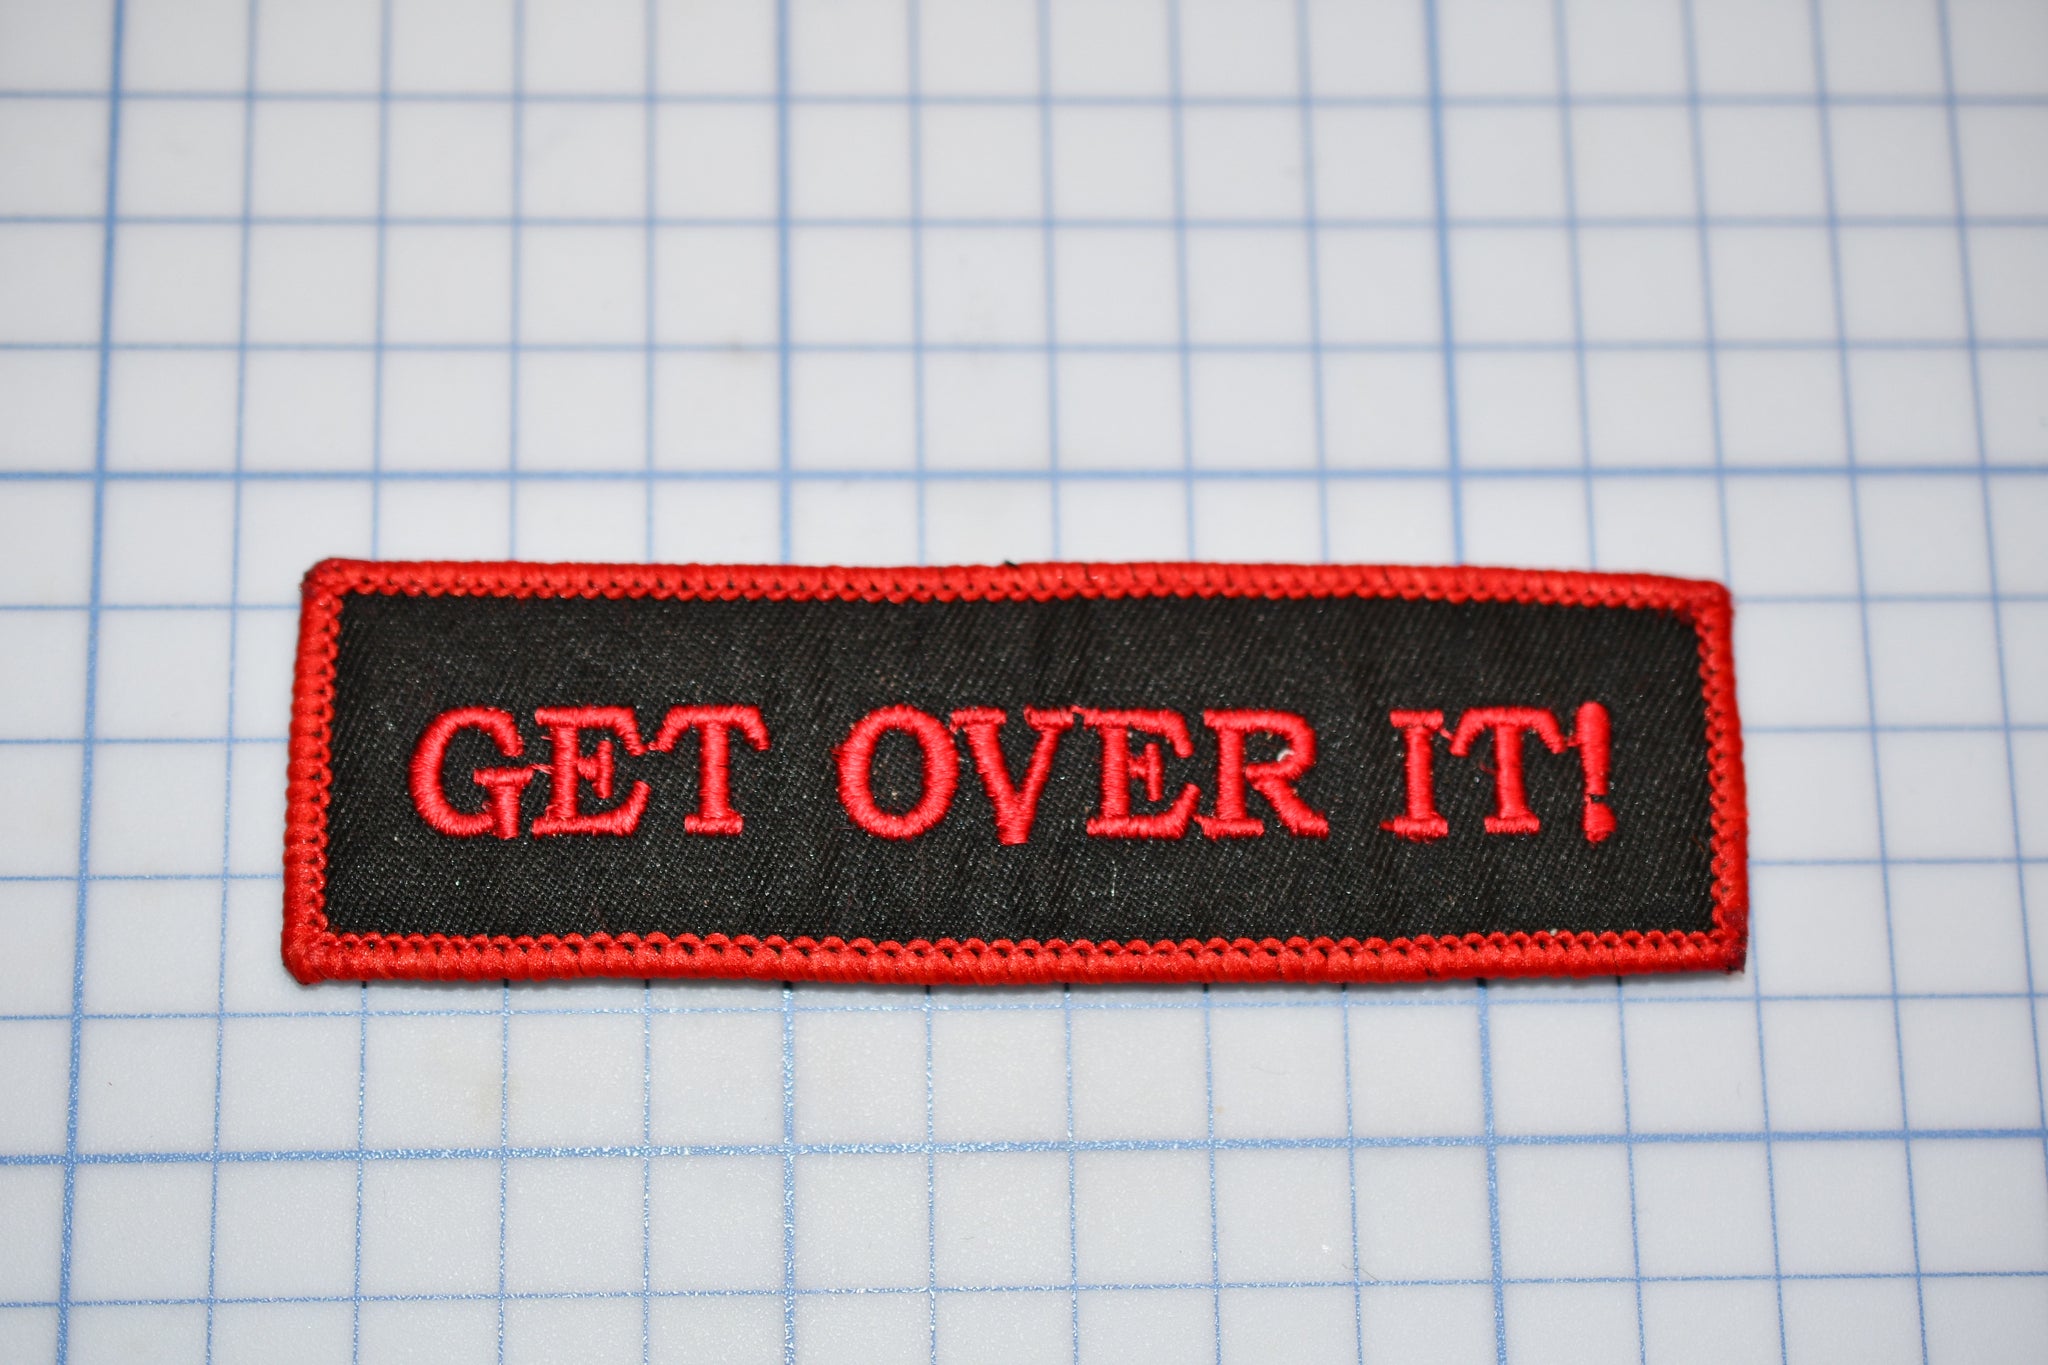 "Get Over It!" Sew On Biker Patch (B30-365)